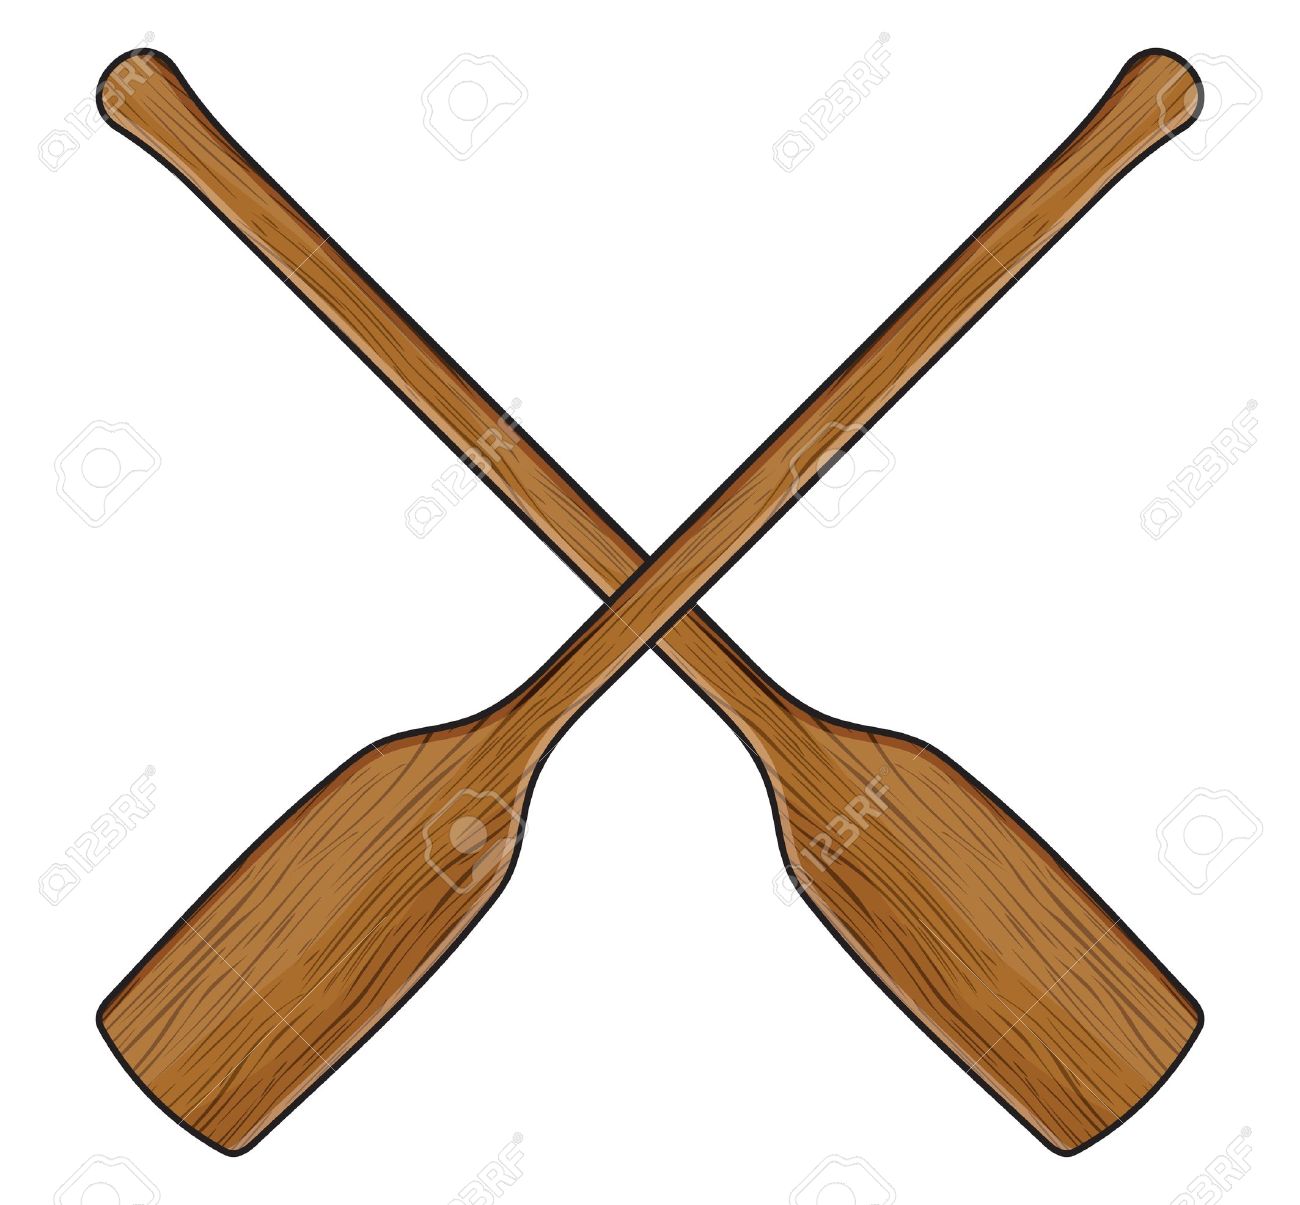 Vector - wooden canoe paddle